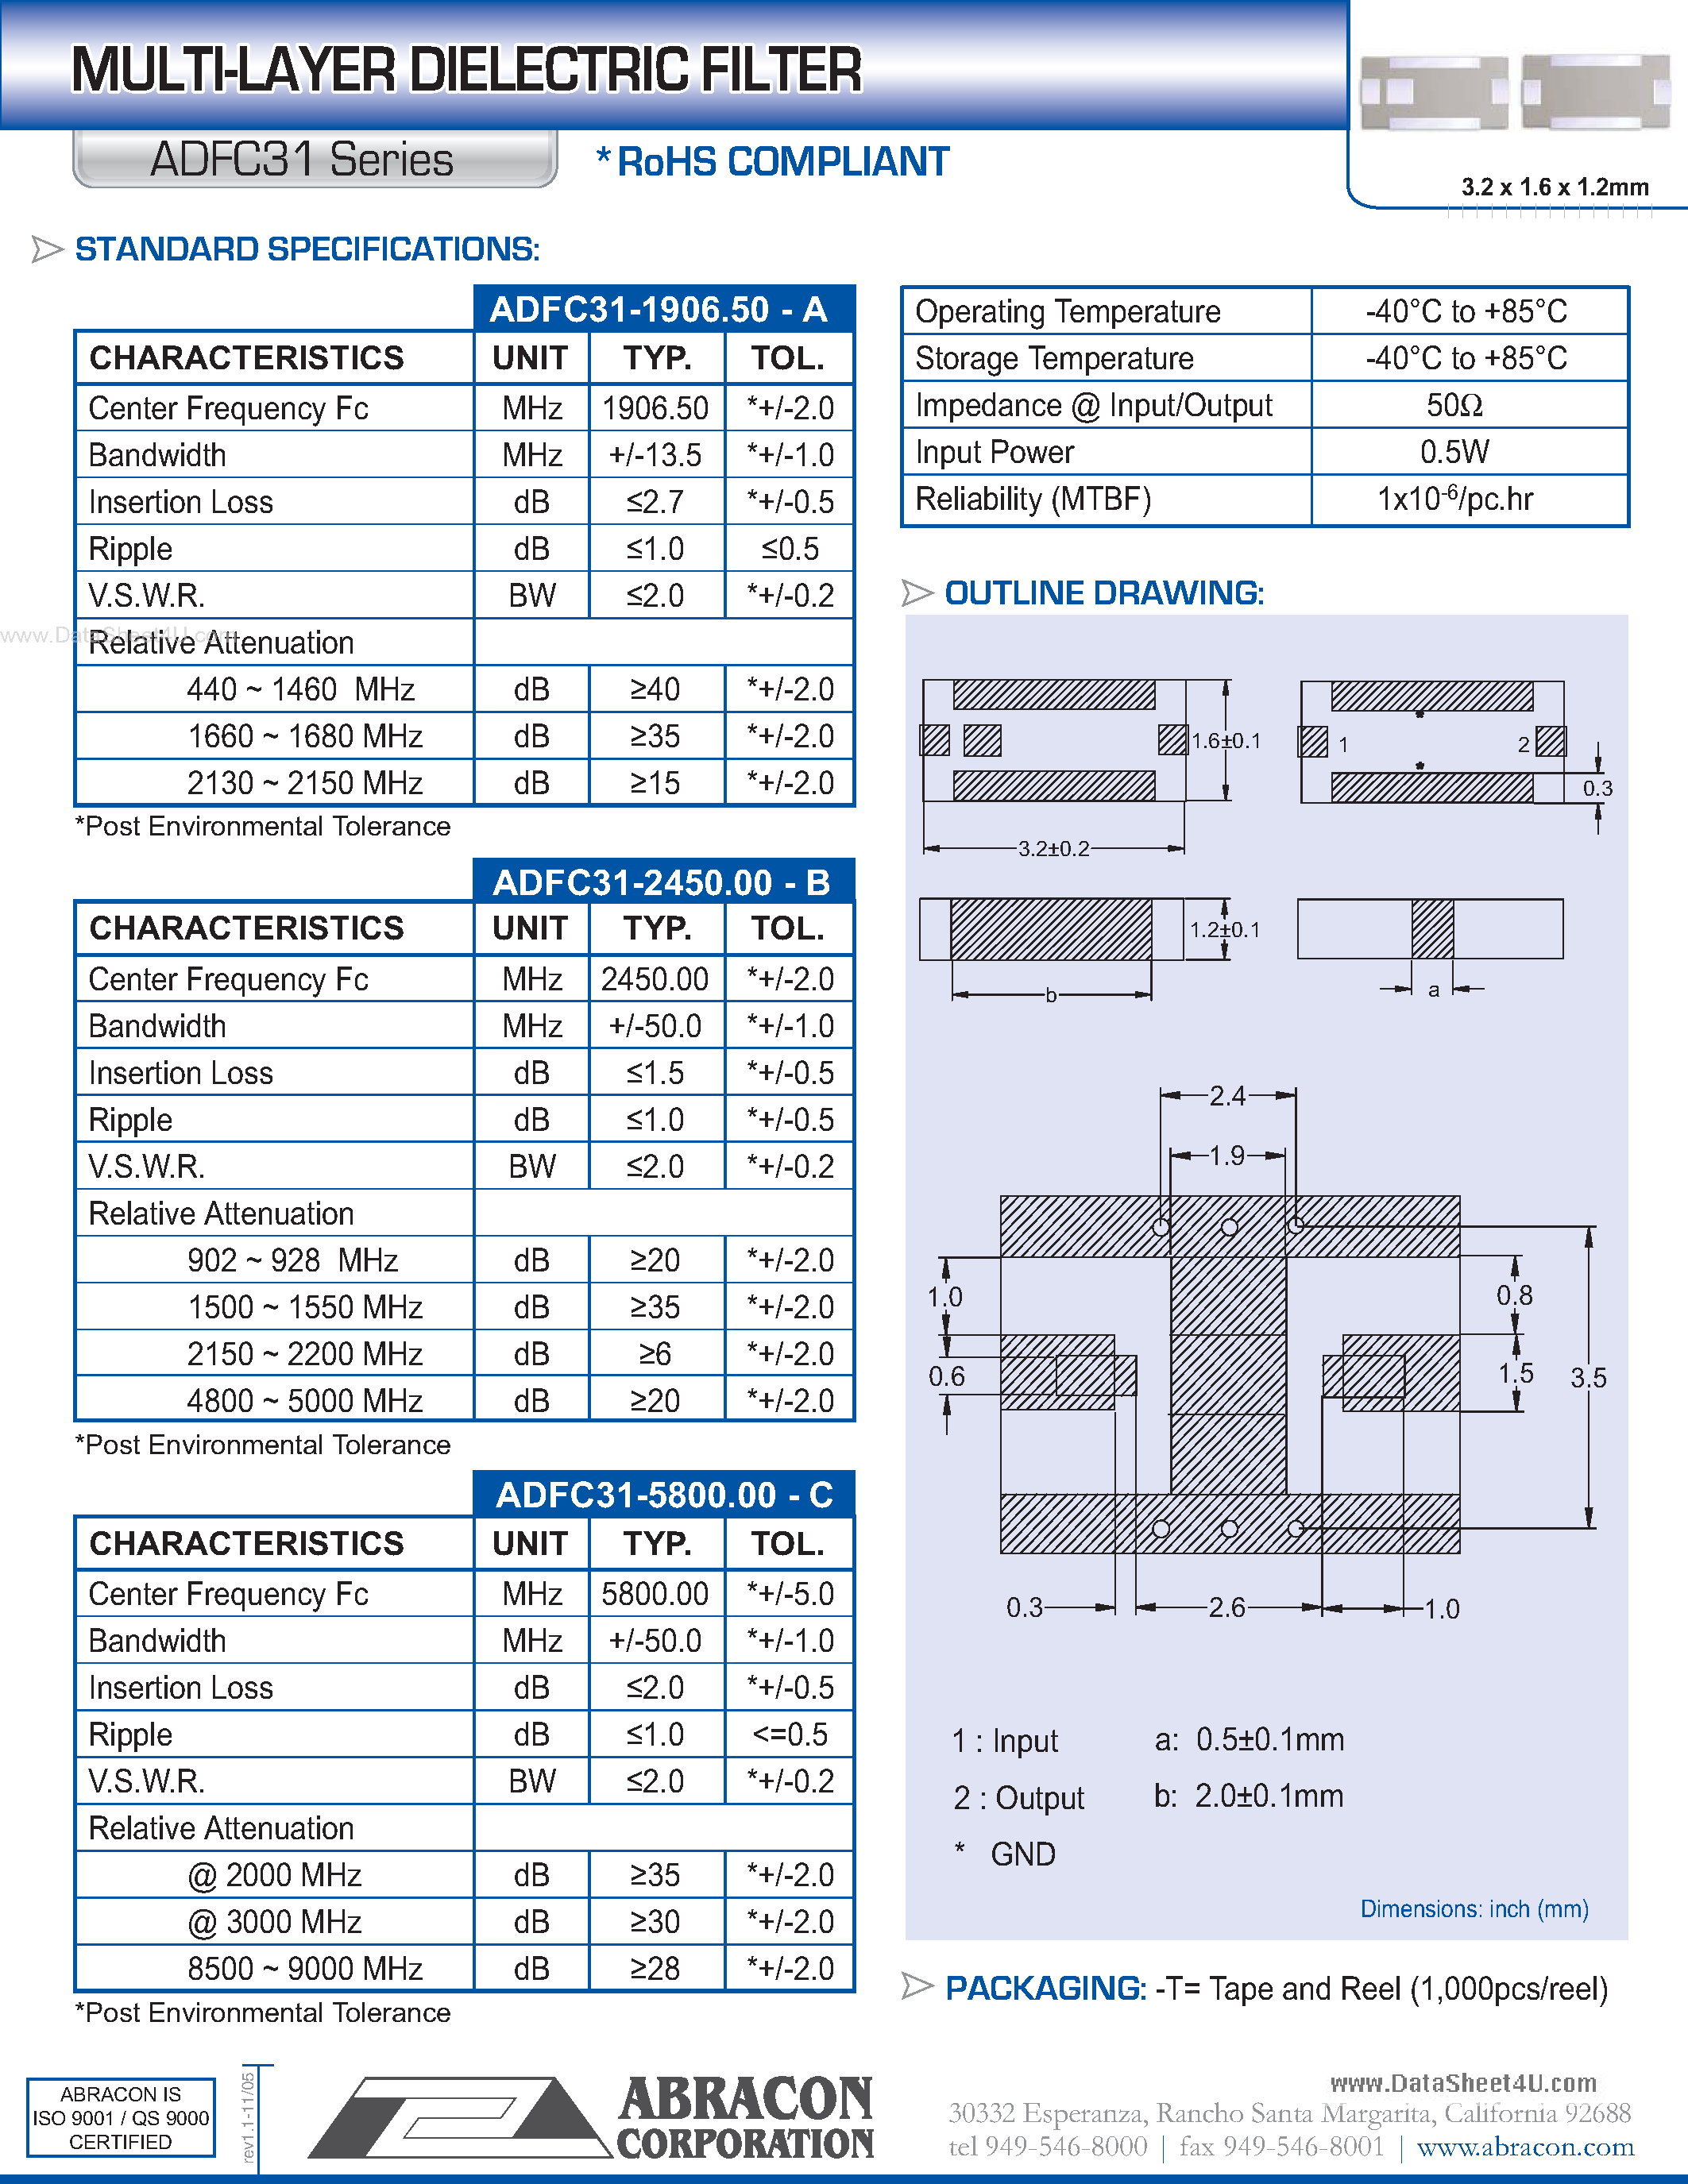 Datasheet ADFC31 - MULTI-LAYER DIELECTRIC FILTER page 1